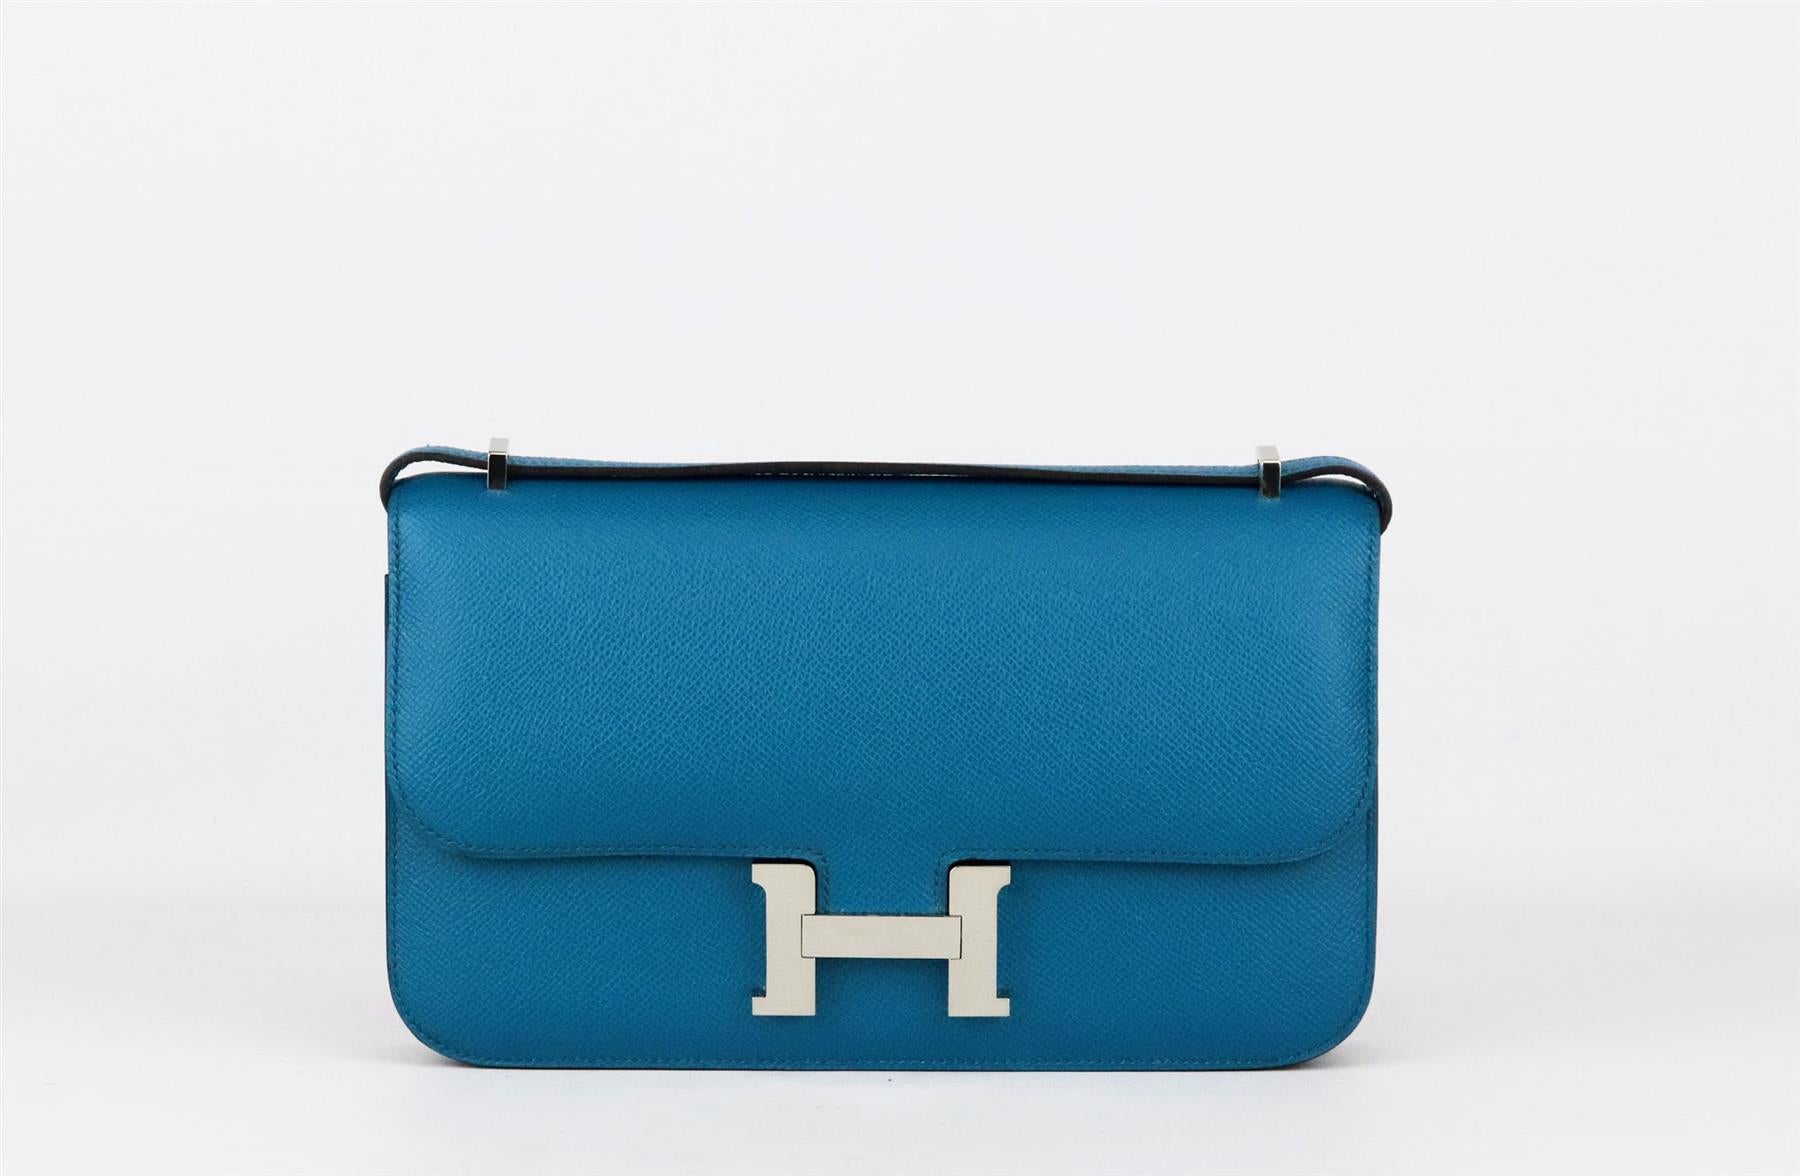 <ul>
<li>Made in France, this beautiful 2014 Hermès ‘Constance Elan’ handbag has been made from textured Epsom leather exterior in a teal/turquoise hue and soft leather interior, it is decorated with palladium hardware on the front and finished with